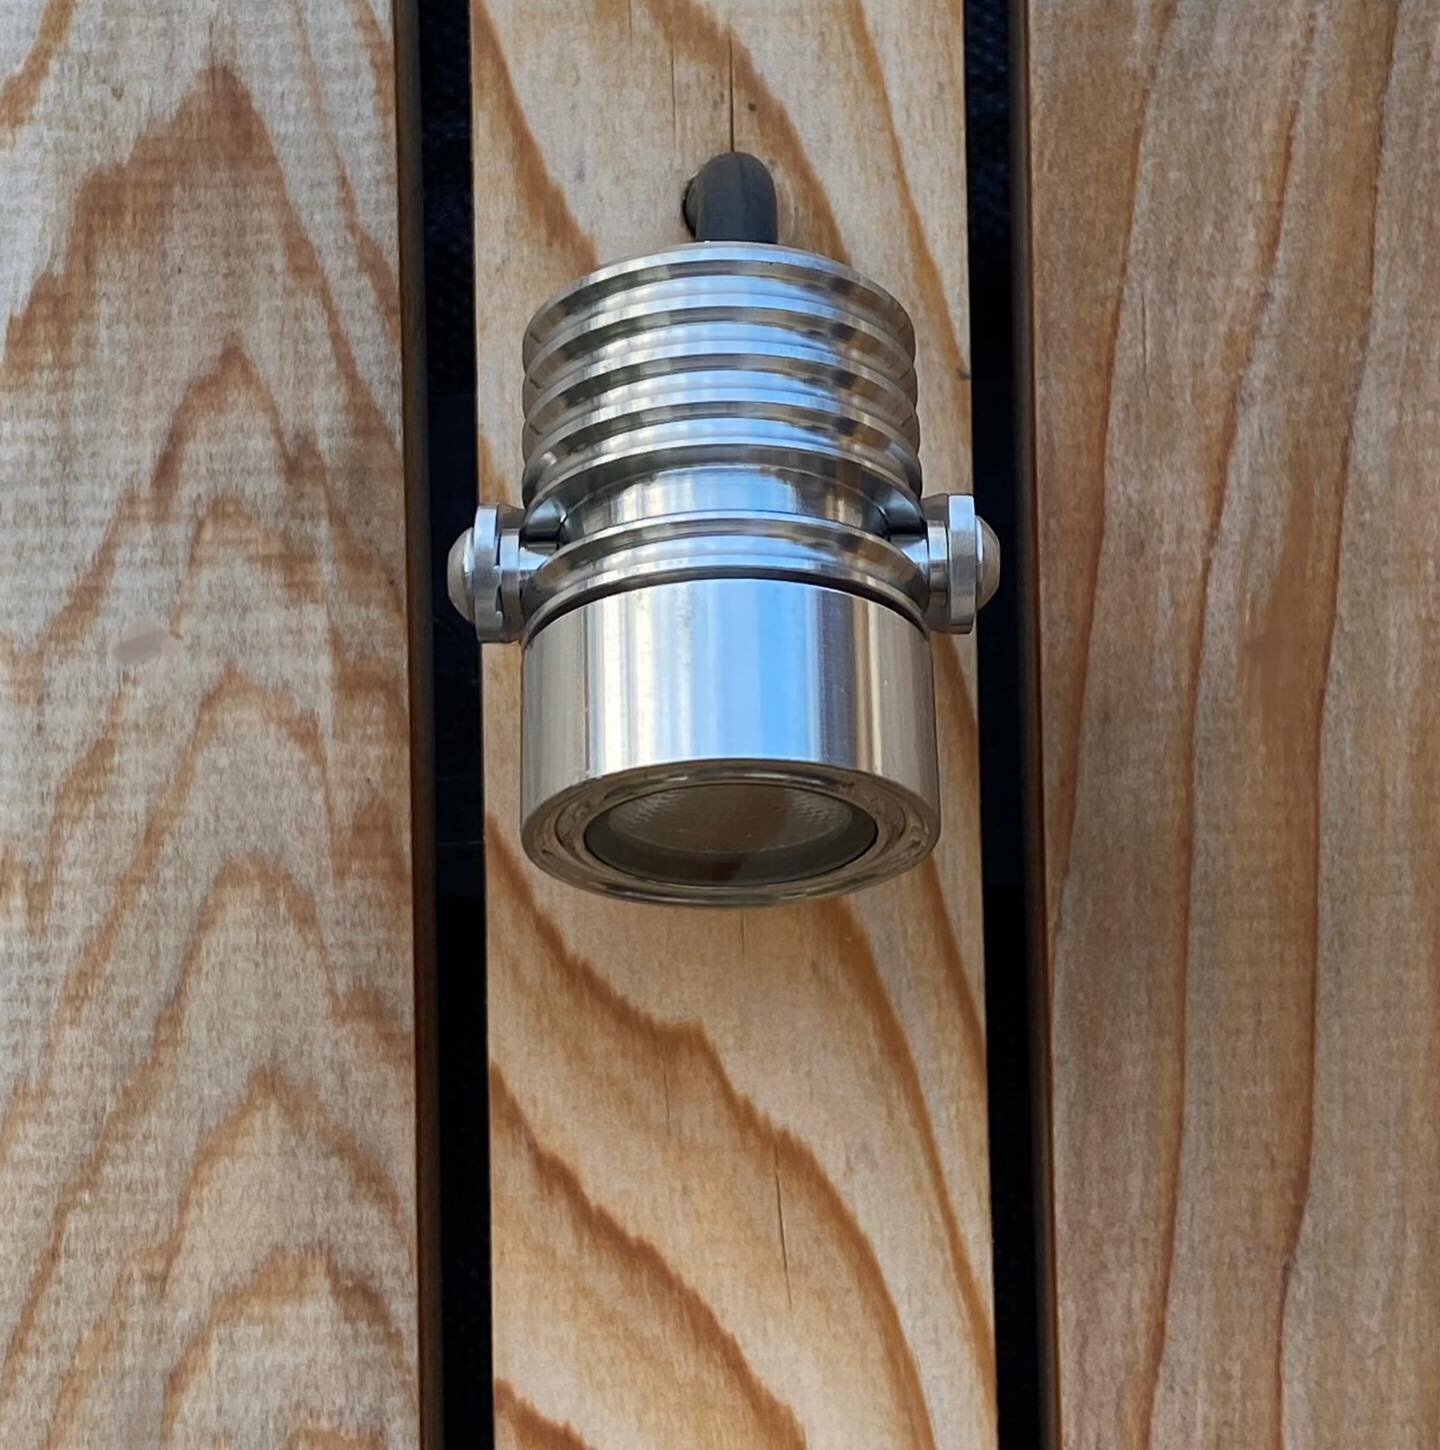 Dinky mini bracket lights on our cedar fencing. I love these wee adjustable LED spots. Really discreet at 40mm diameter they sit neatly centred on the cedar battens. 
LuxR M2 LED Bracket Spotlight in stainless steel.